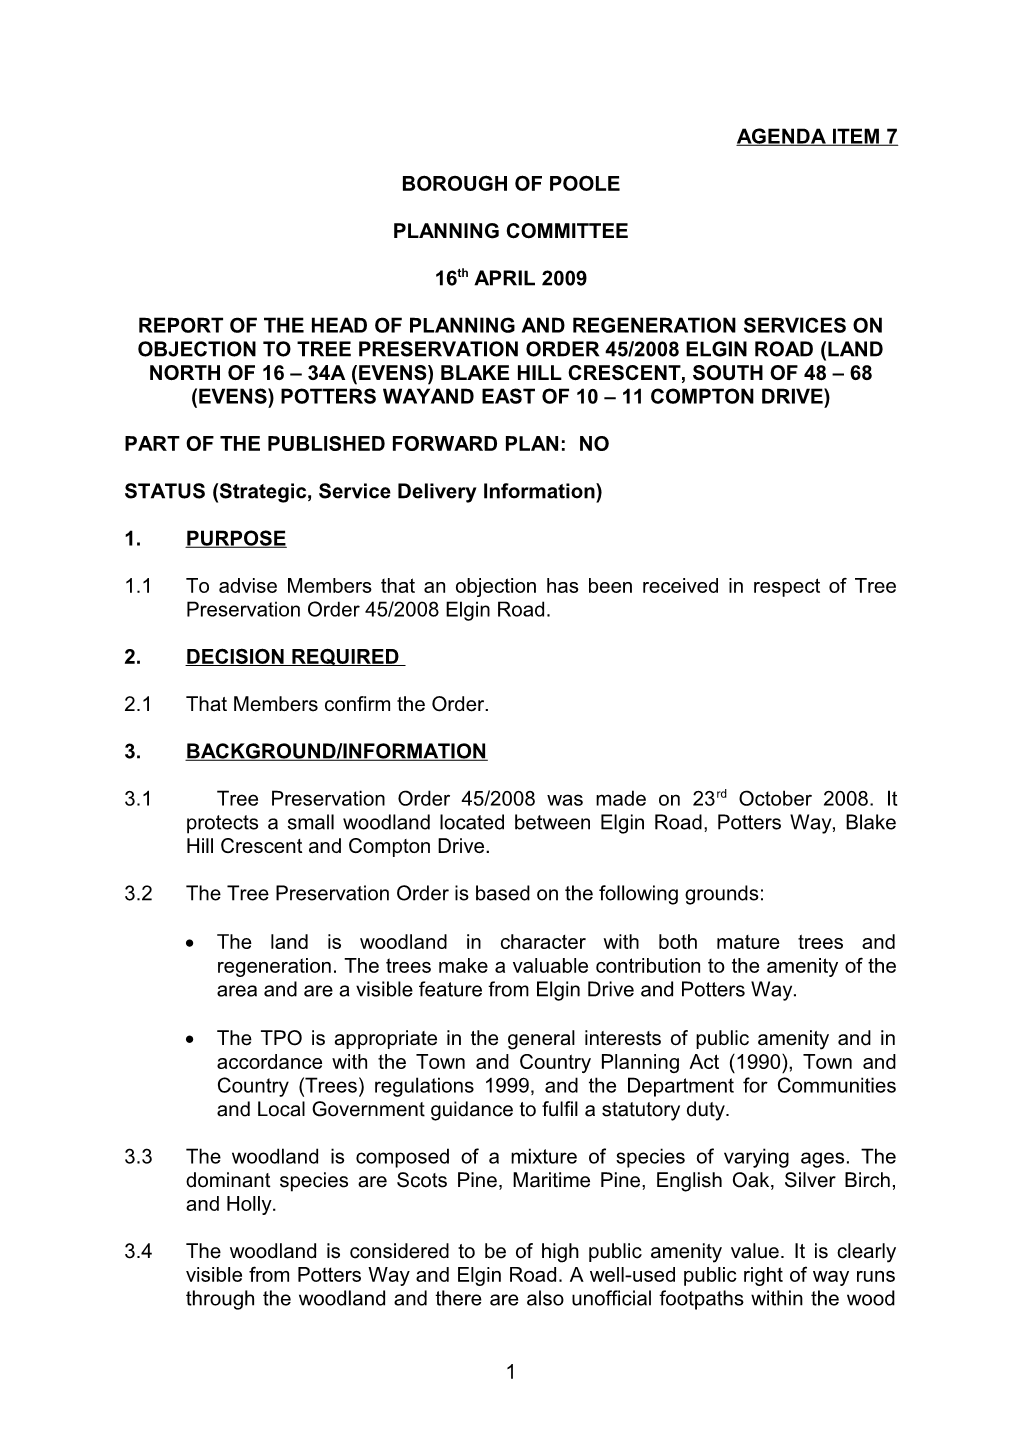 Objection to Tree Preservation Order 45/2008 Elgin Road (Land North of 16 34A (Evens) Blake